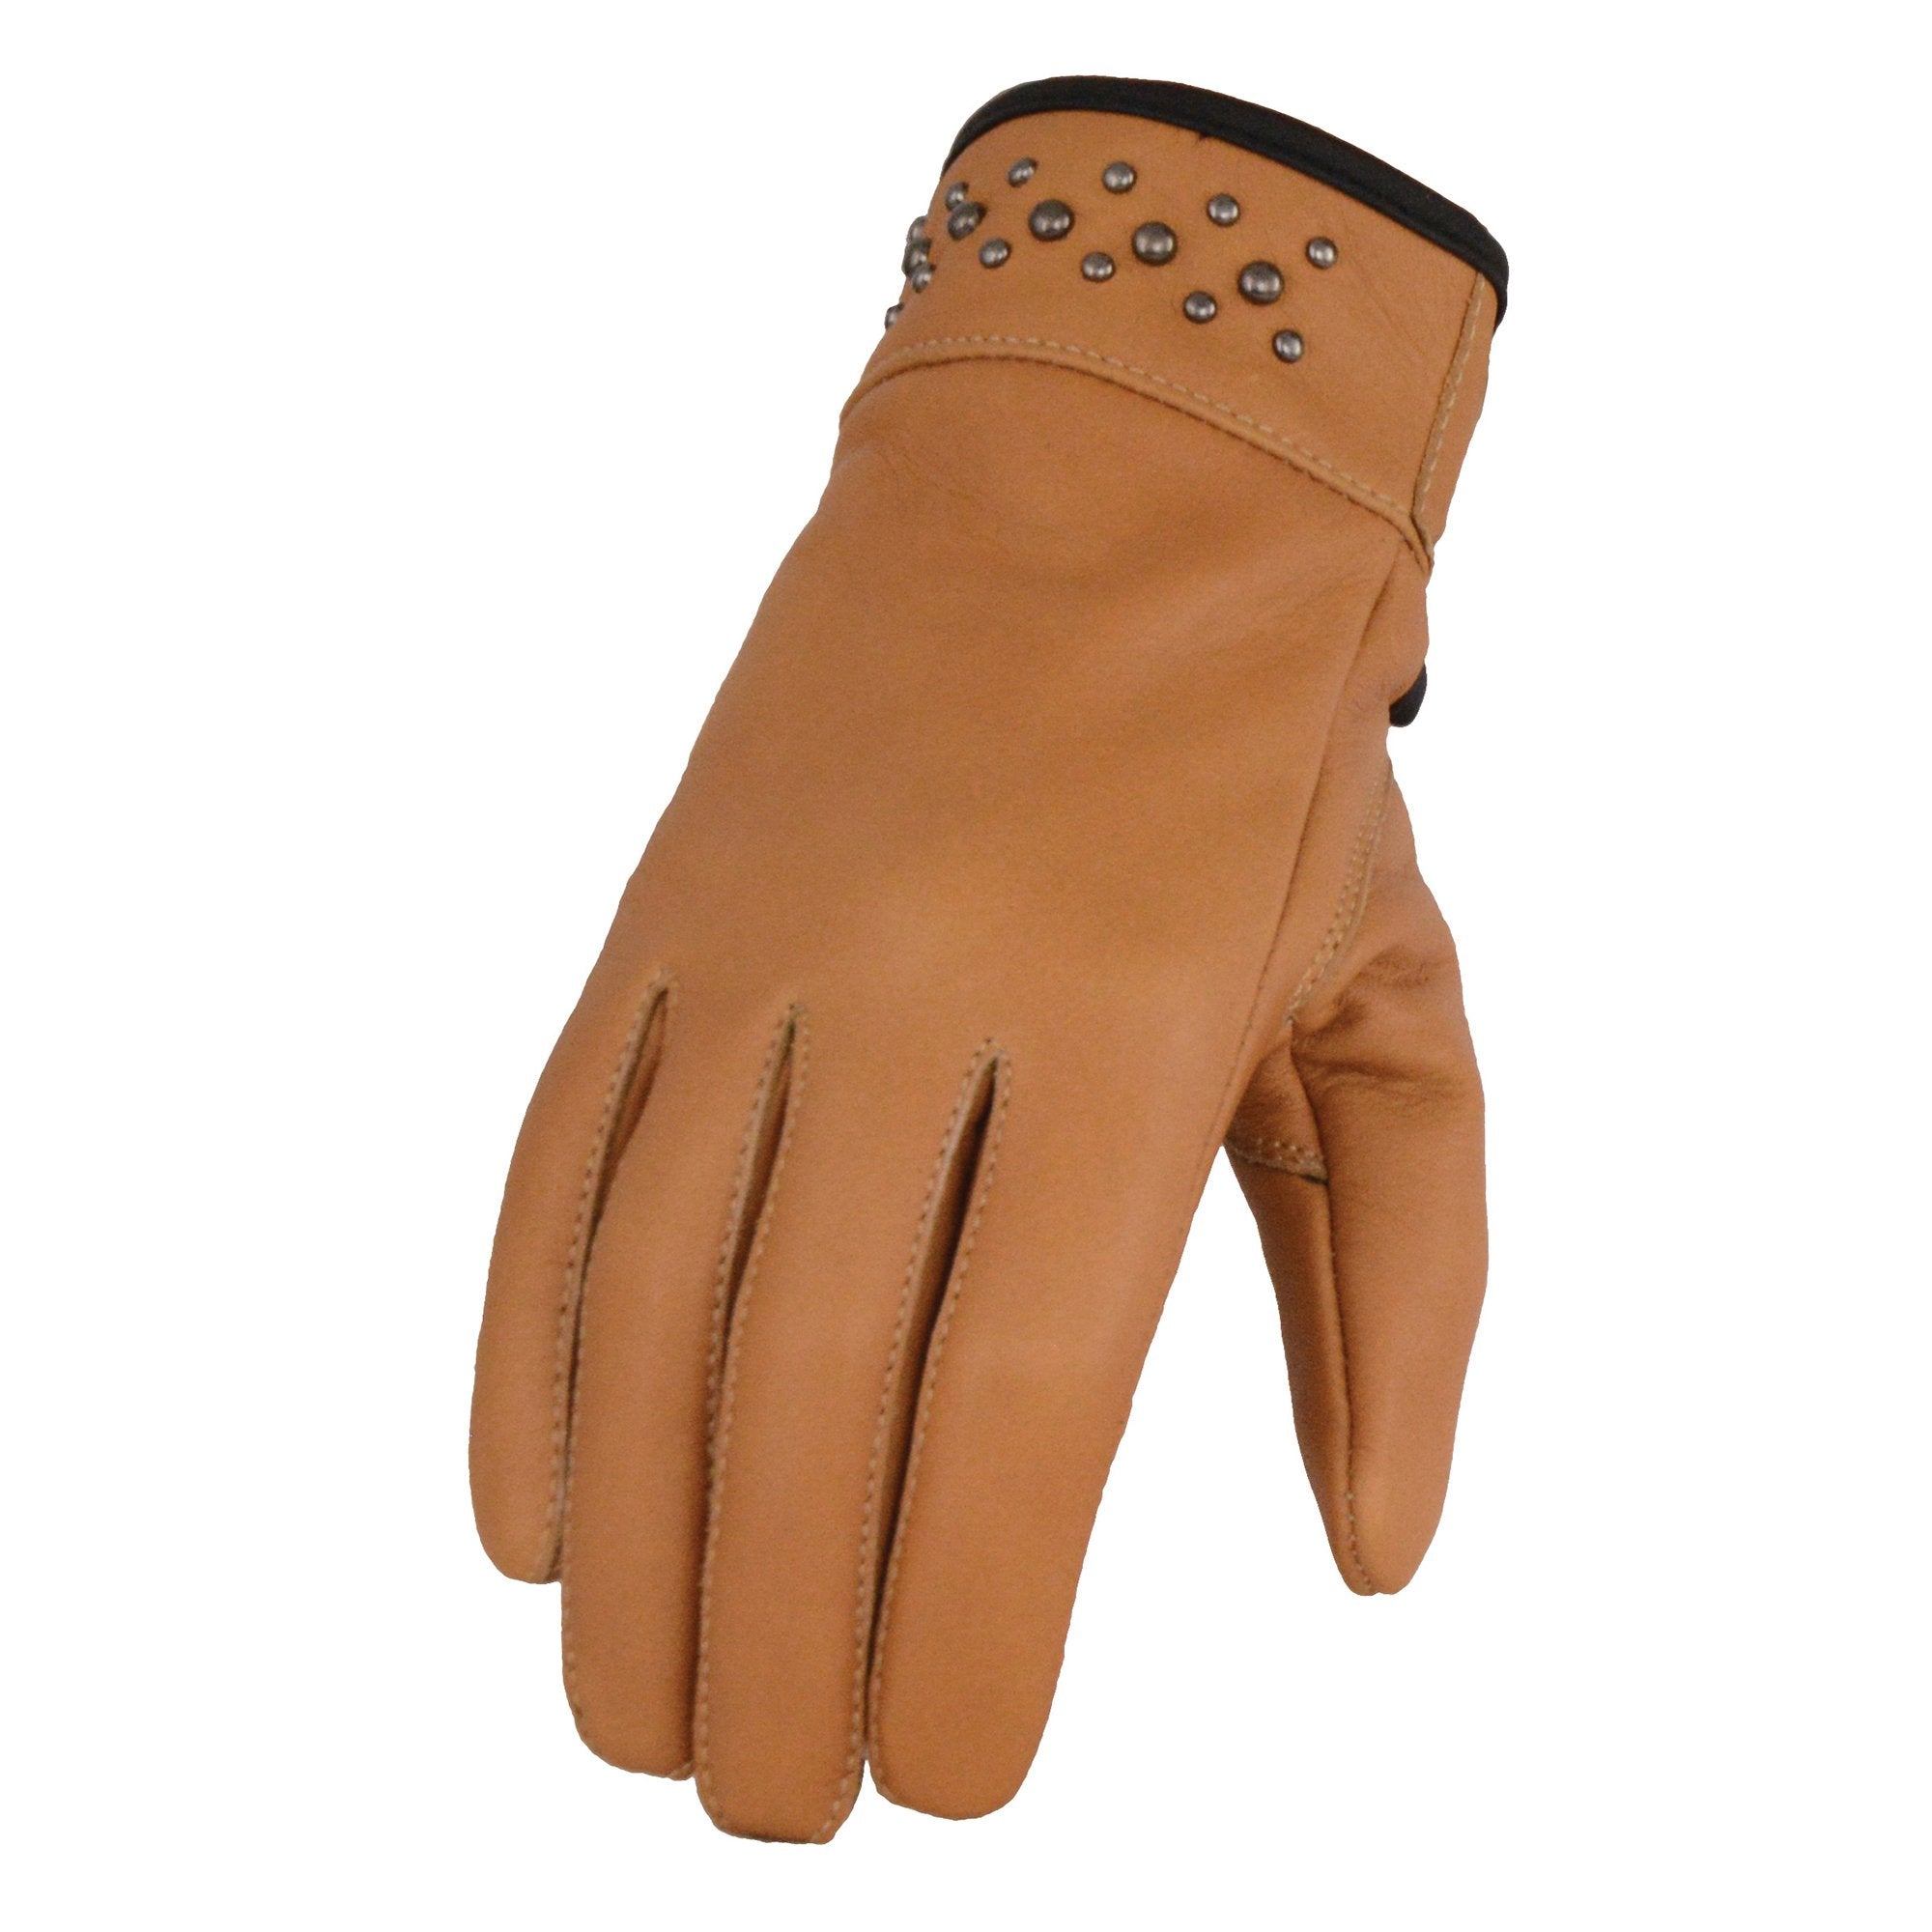 Milwaukee Leather MG7760 Women's Saddle Leather Gloves with Gel Palms